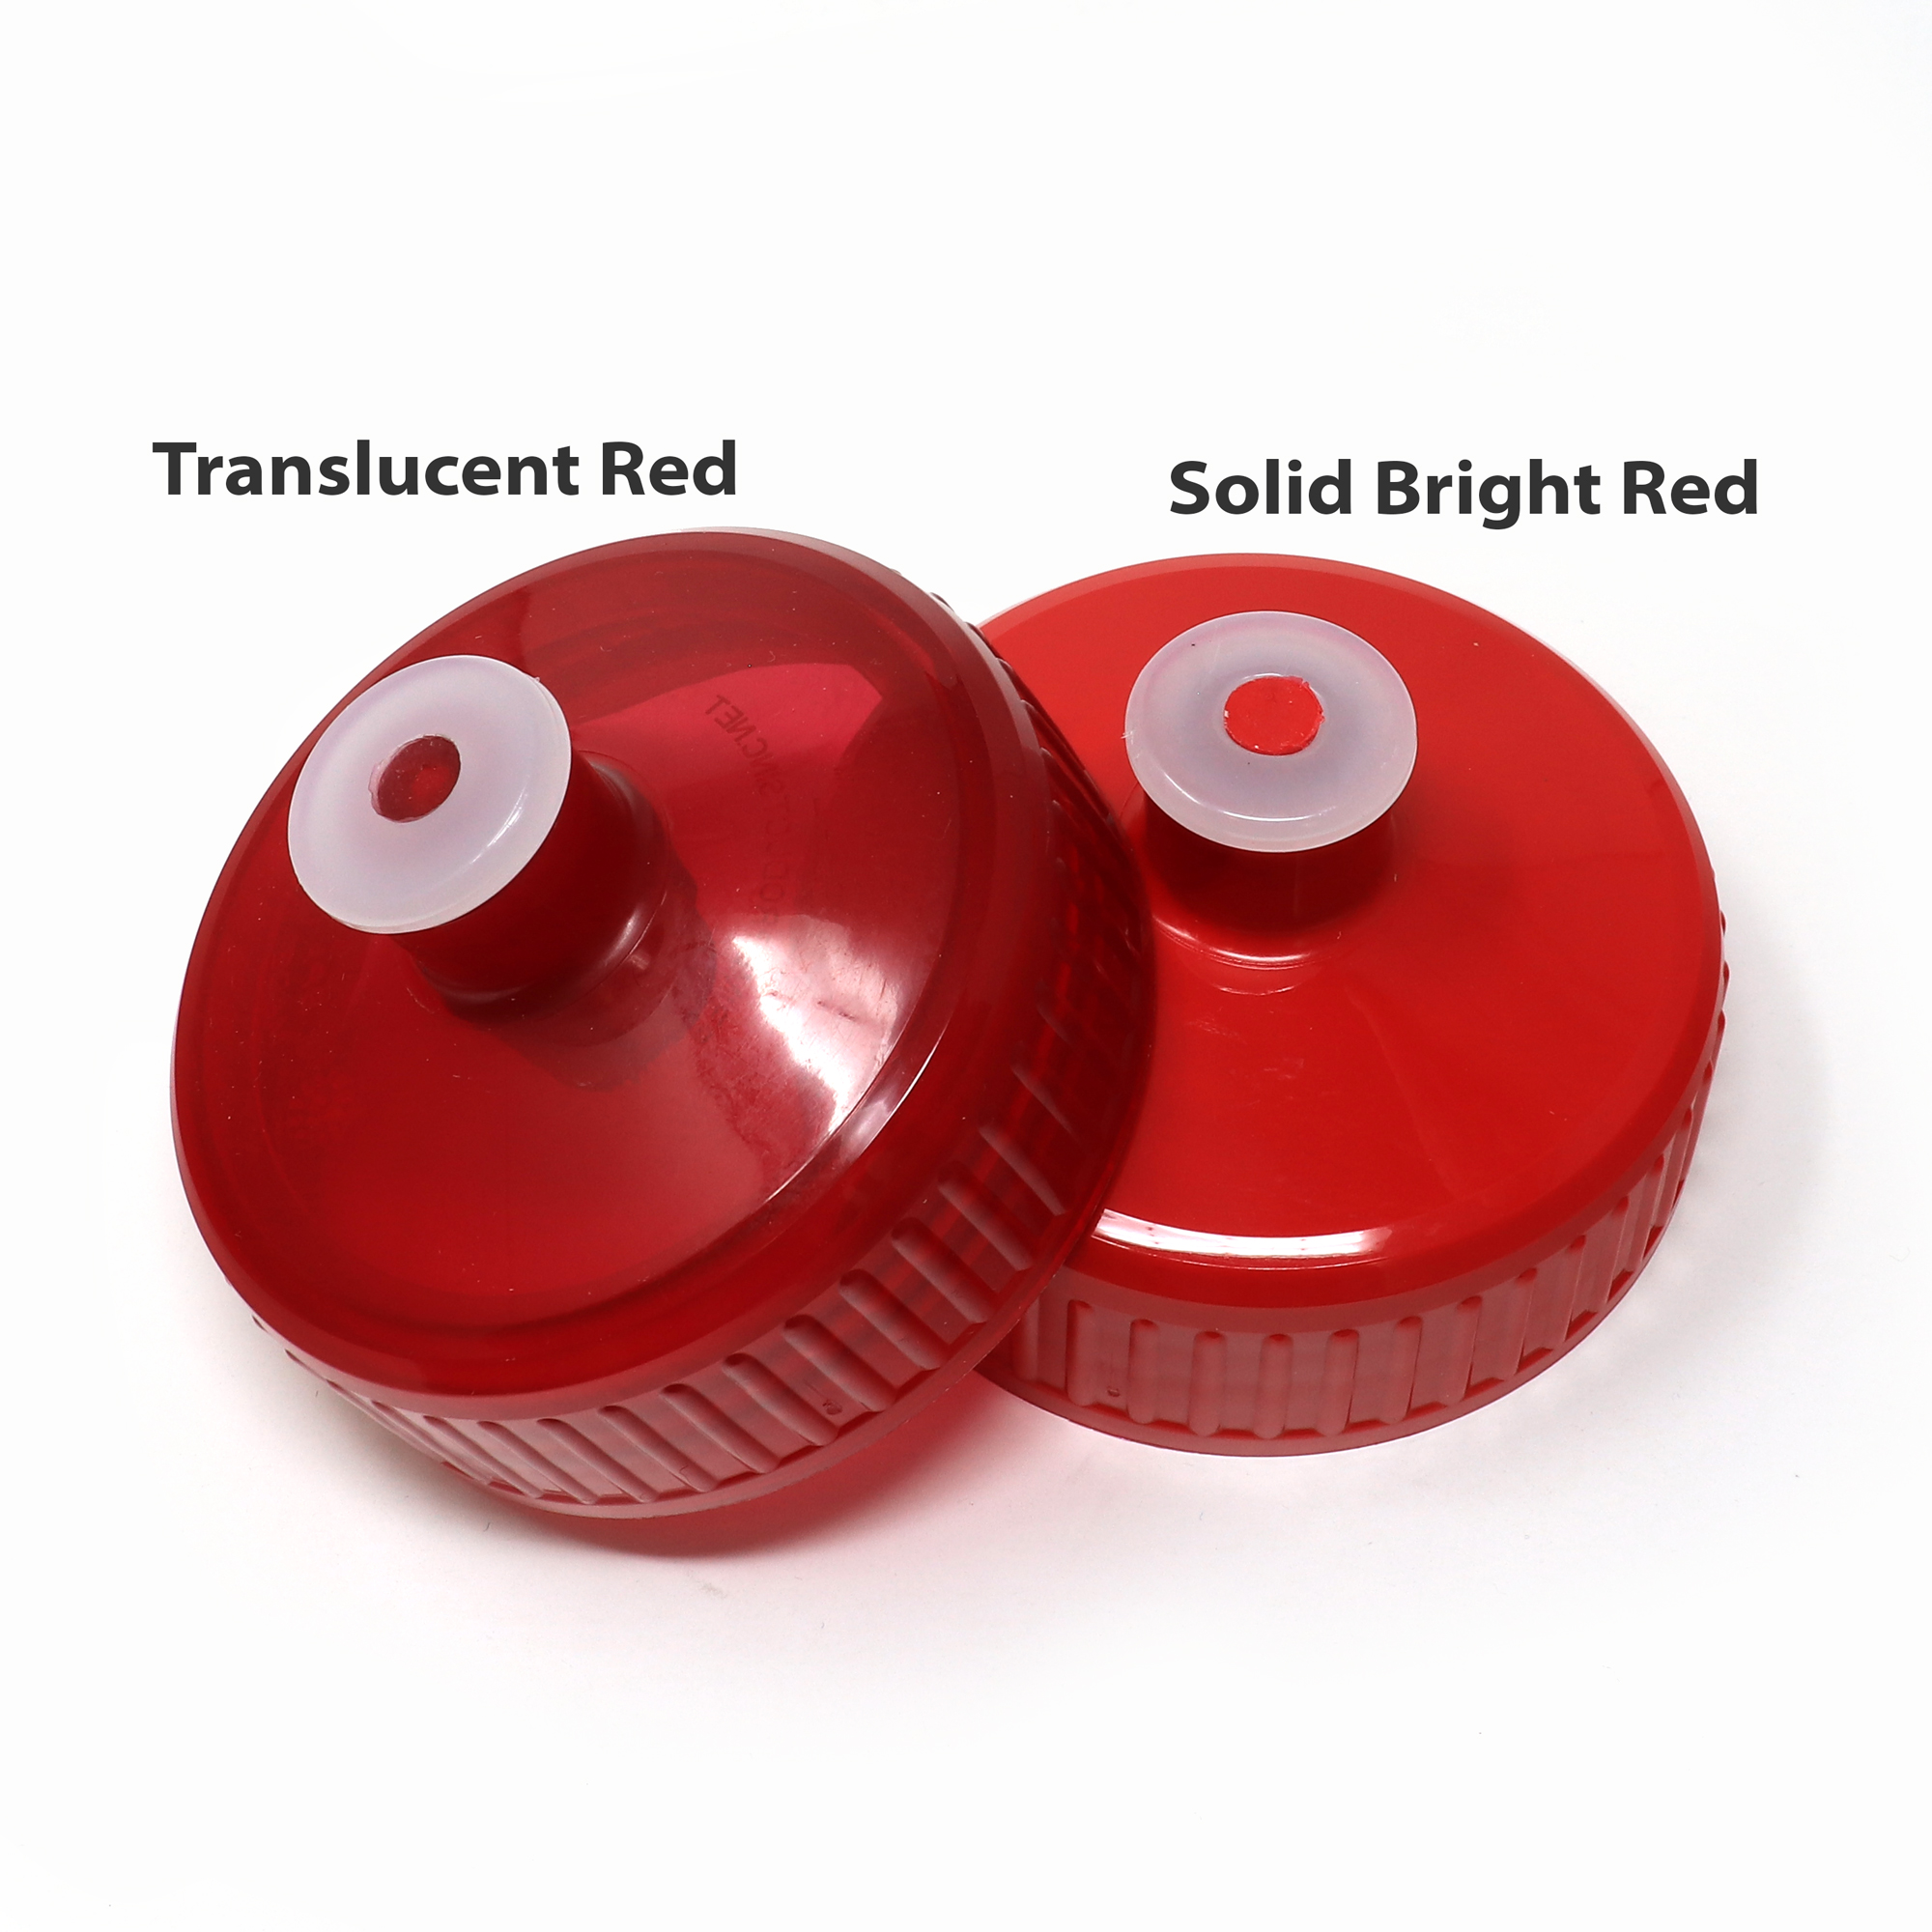 Replacement Push/Pull Lids - Fits Rolling Sands Brand Only